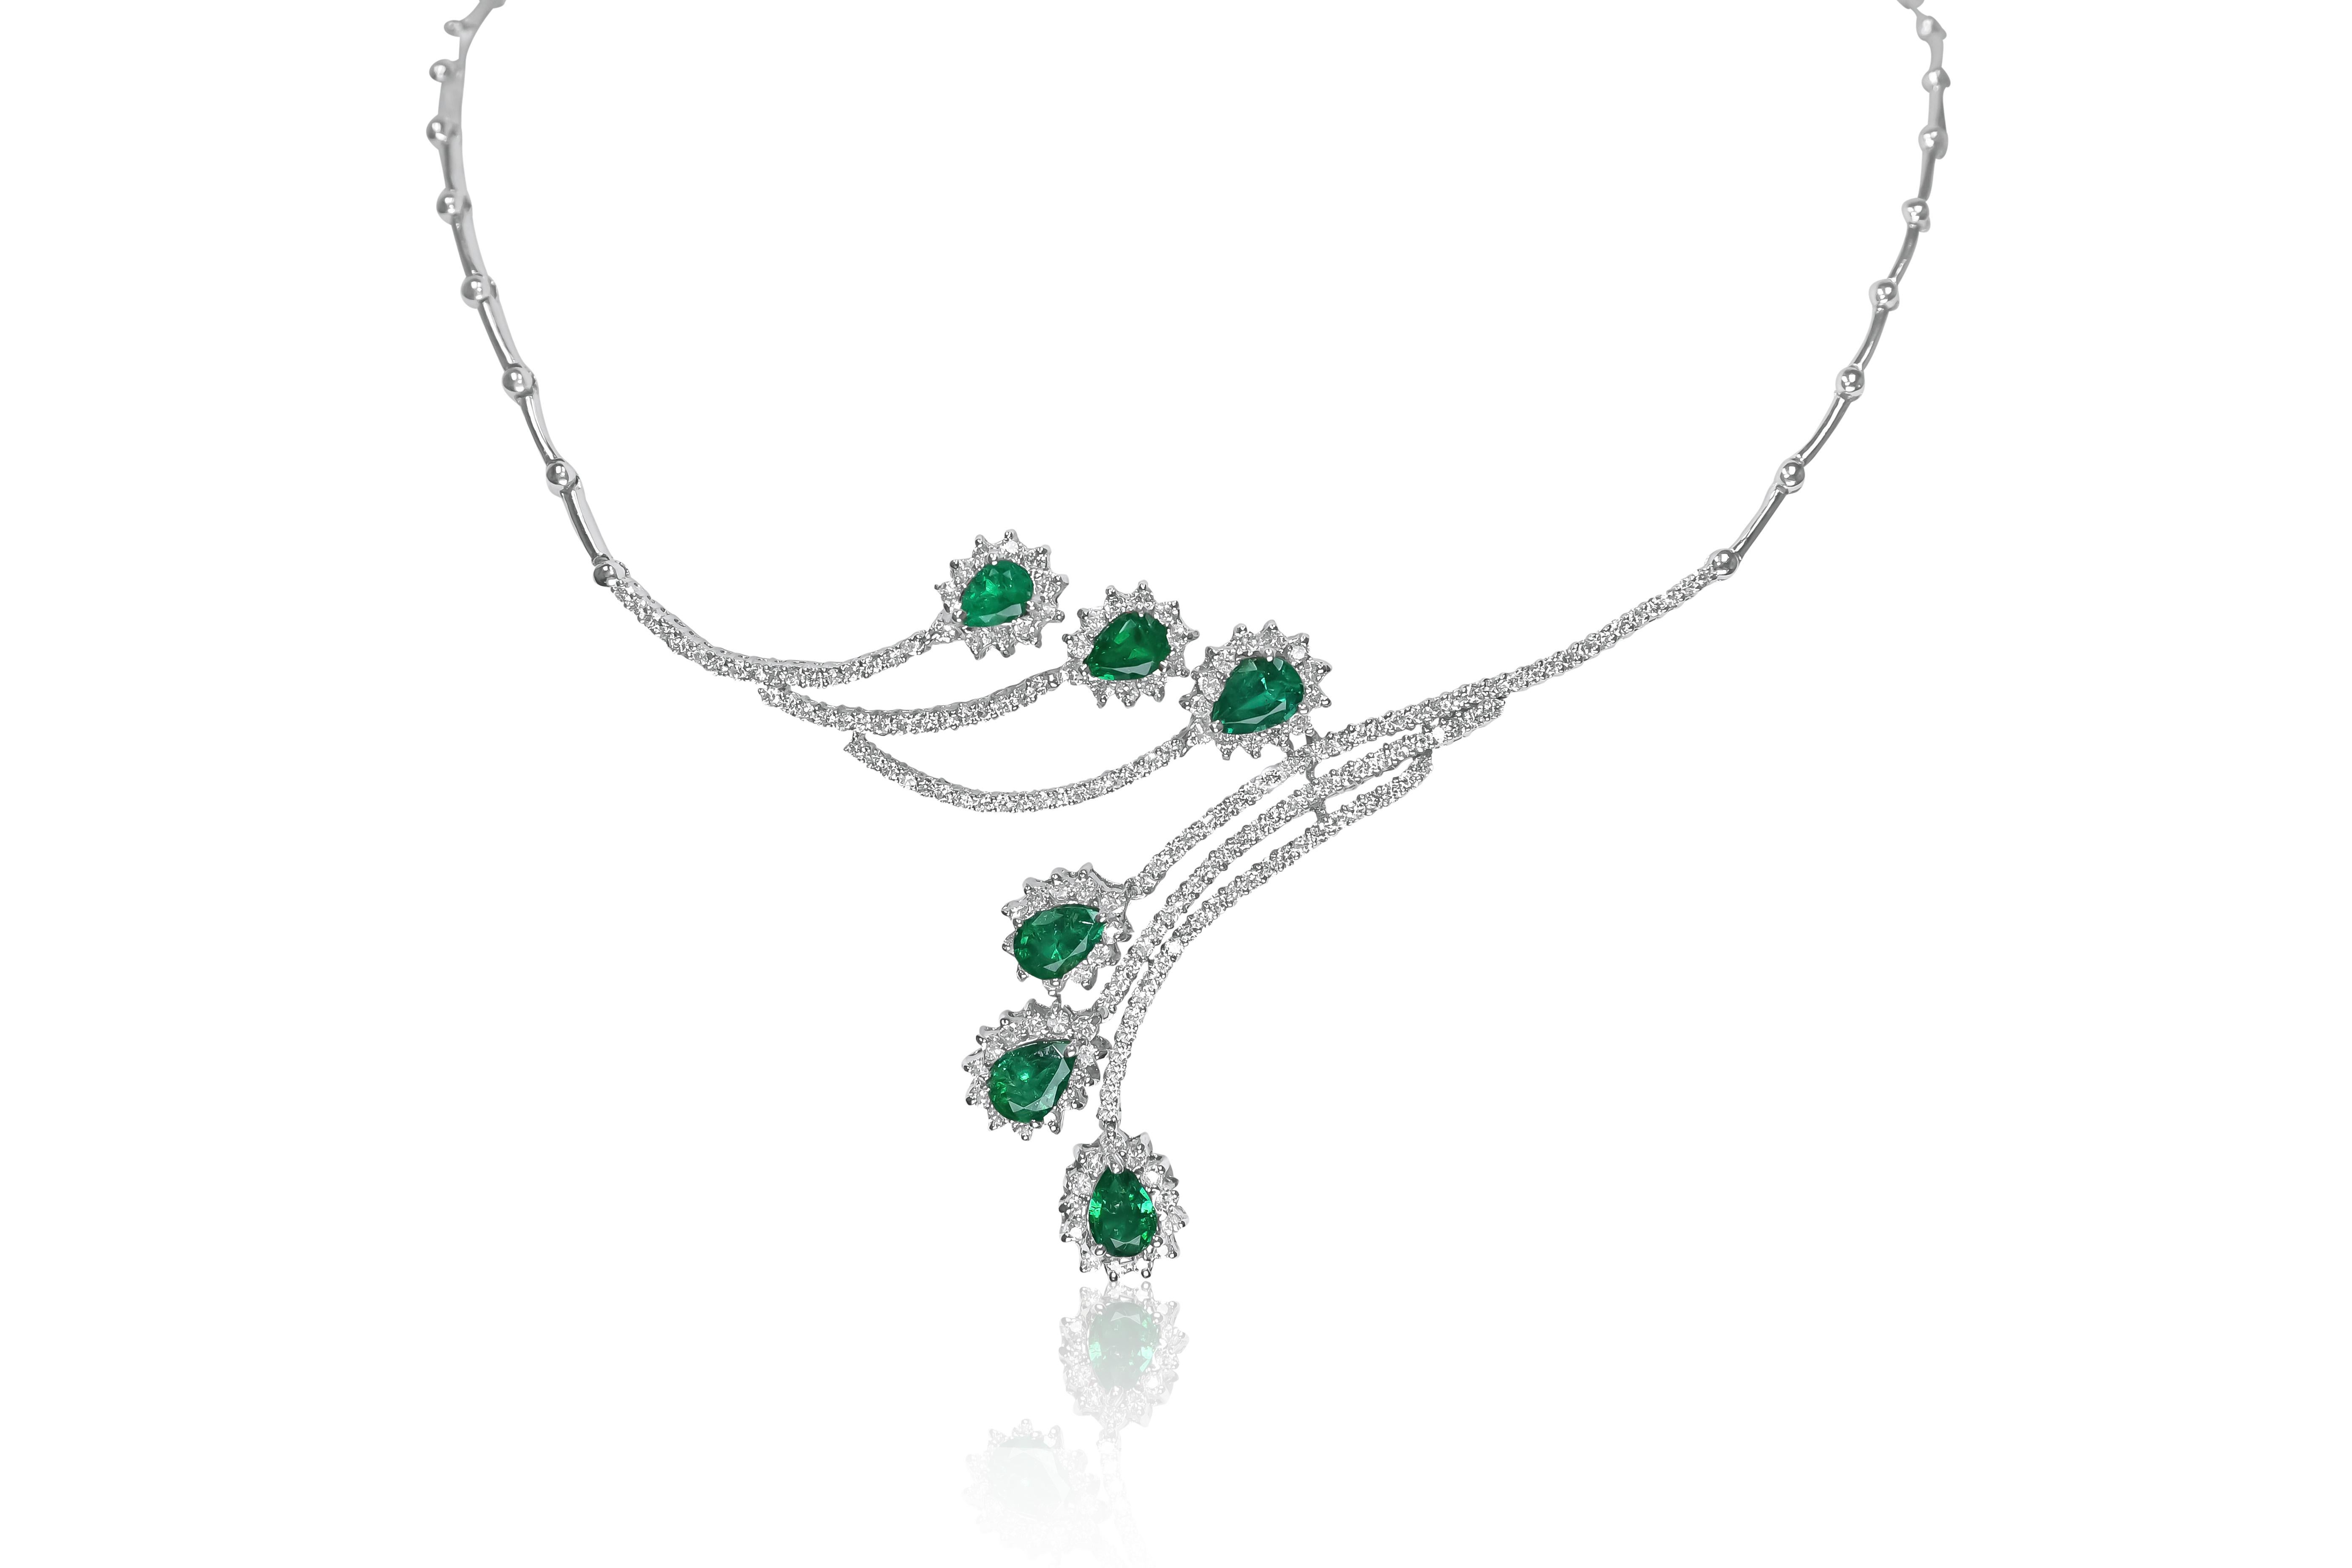 N186E- Beautiful white and emerald necklace features 3.65 cts of white diamonds and 3.65 cts of emeralds, mounted in a 14K white gold casting.